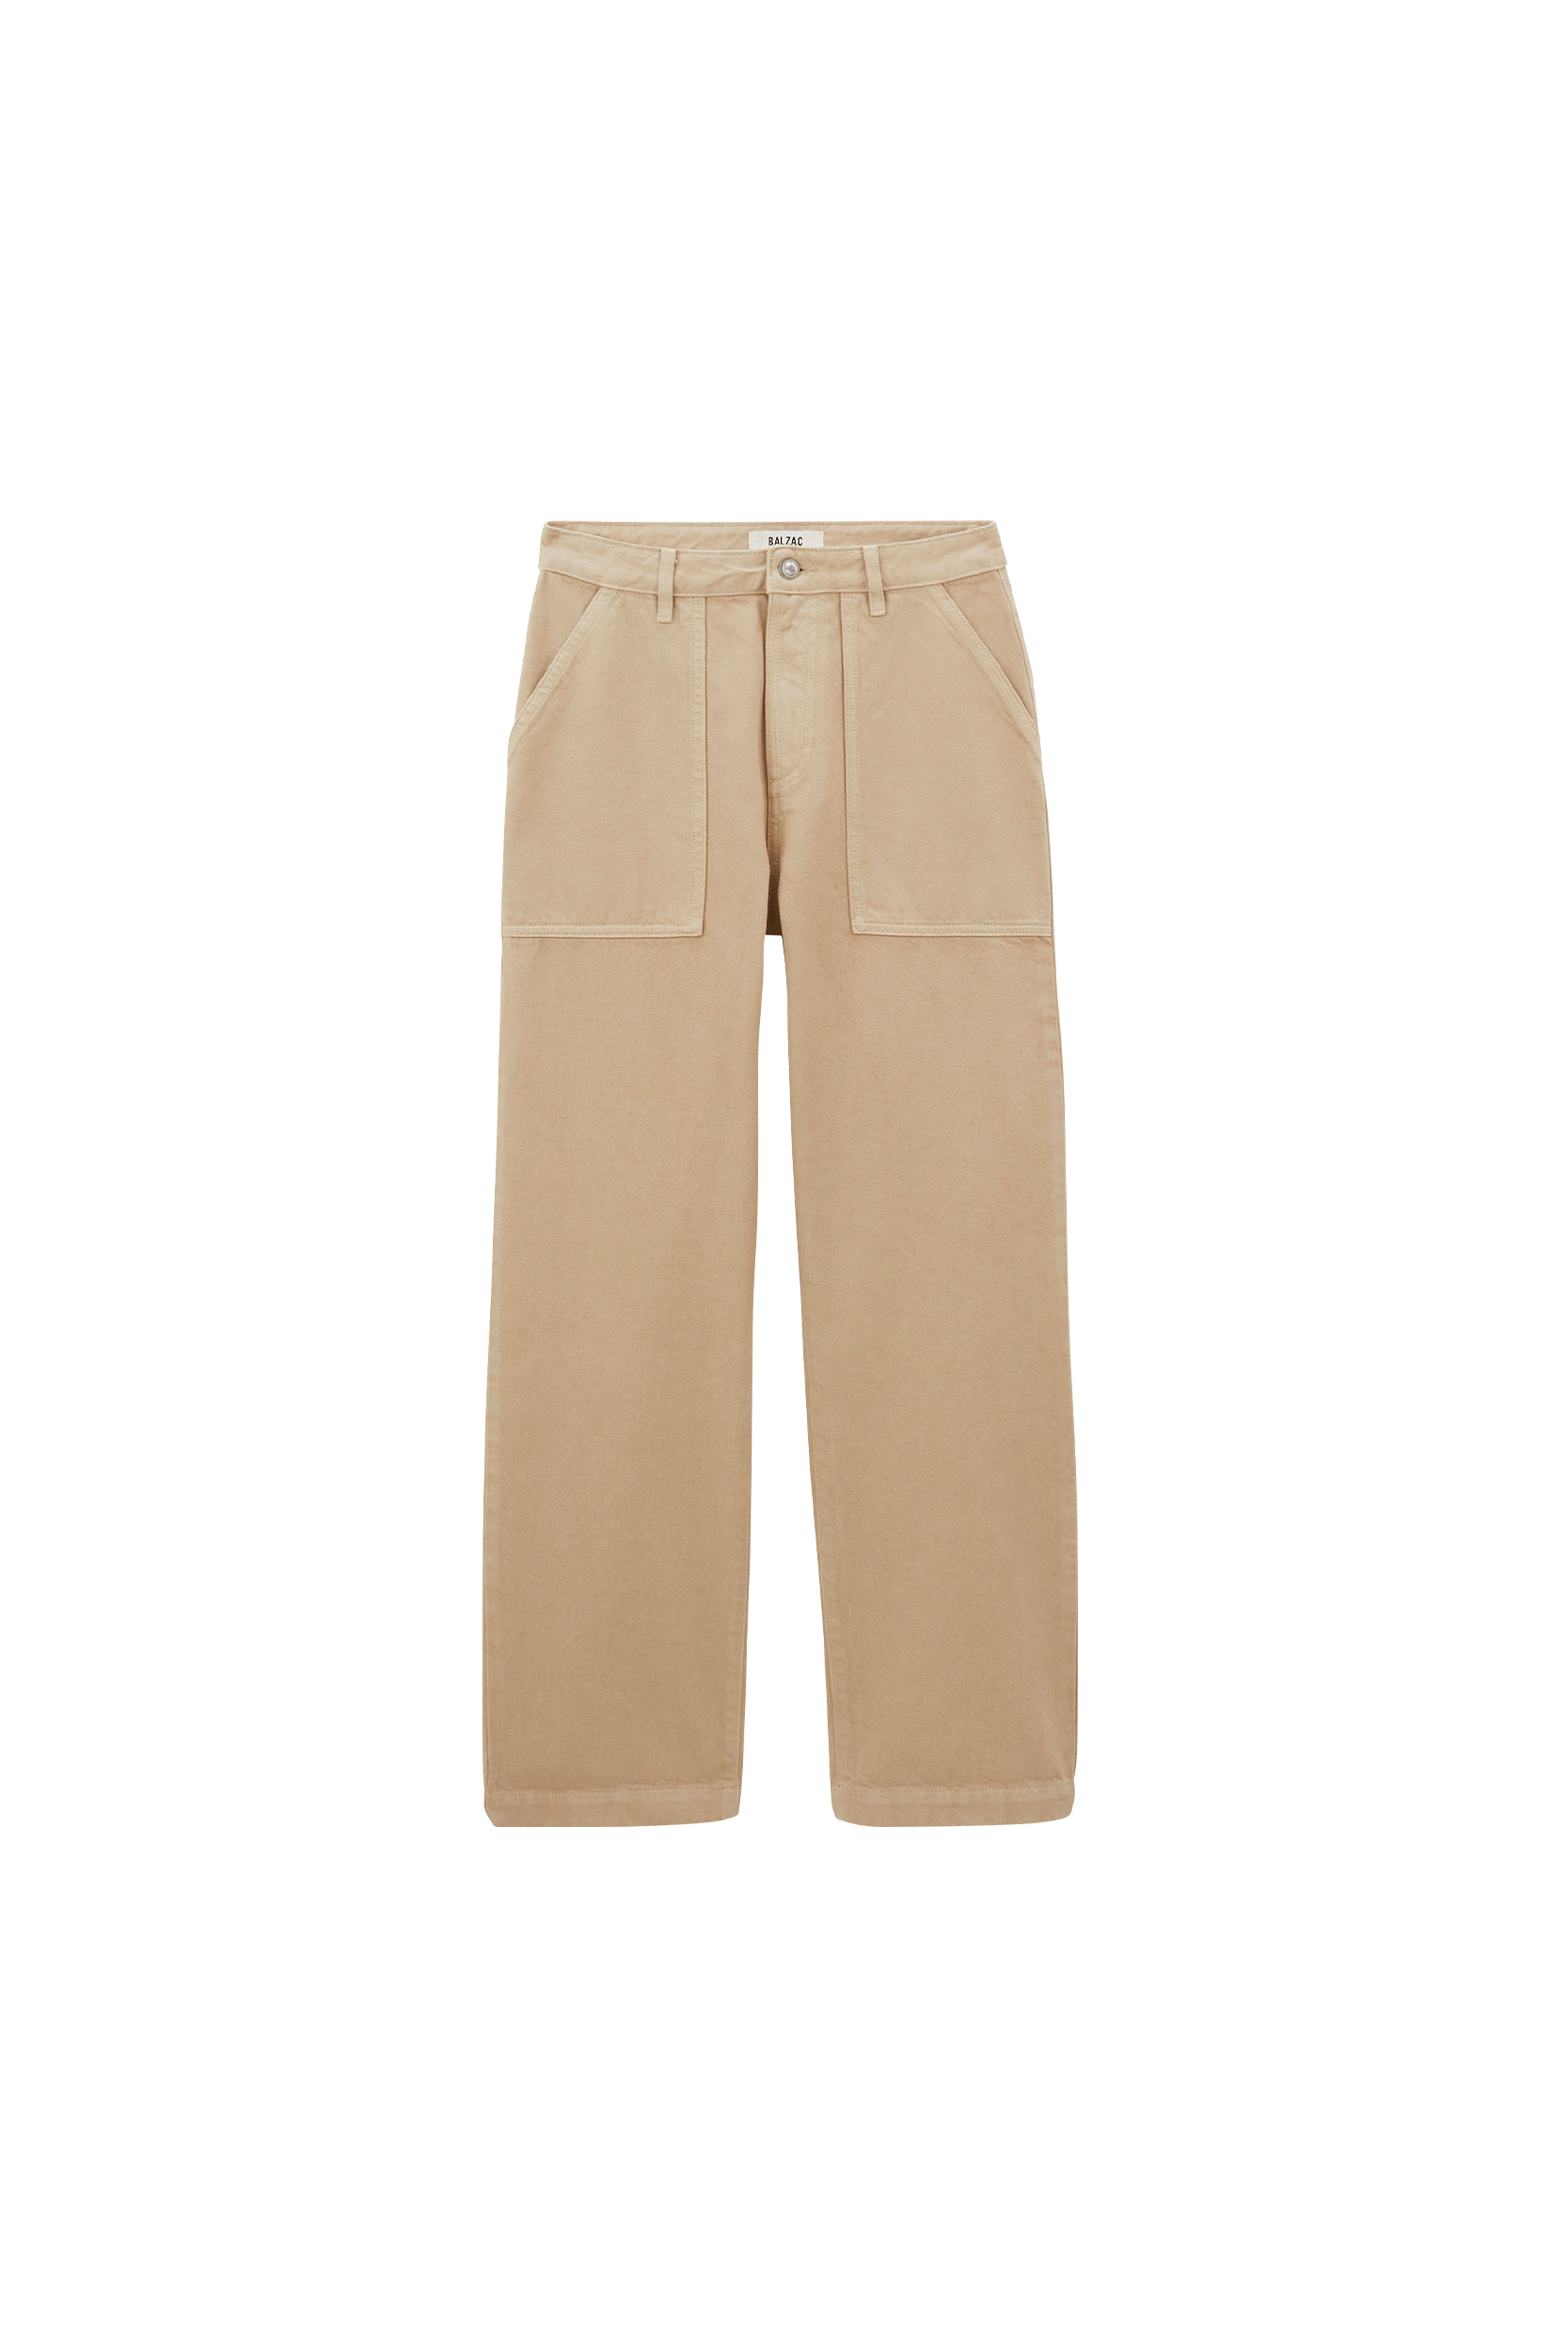 Mineral beige Nazaire jeans